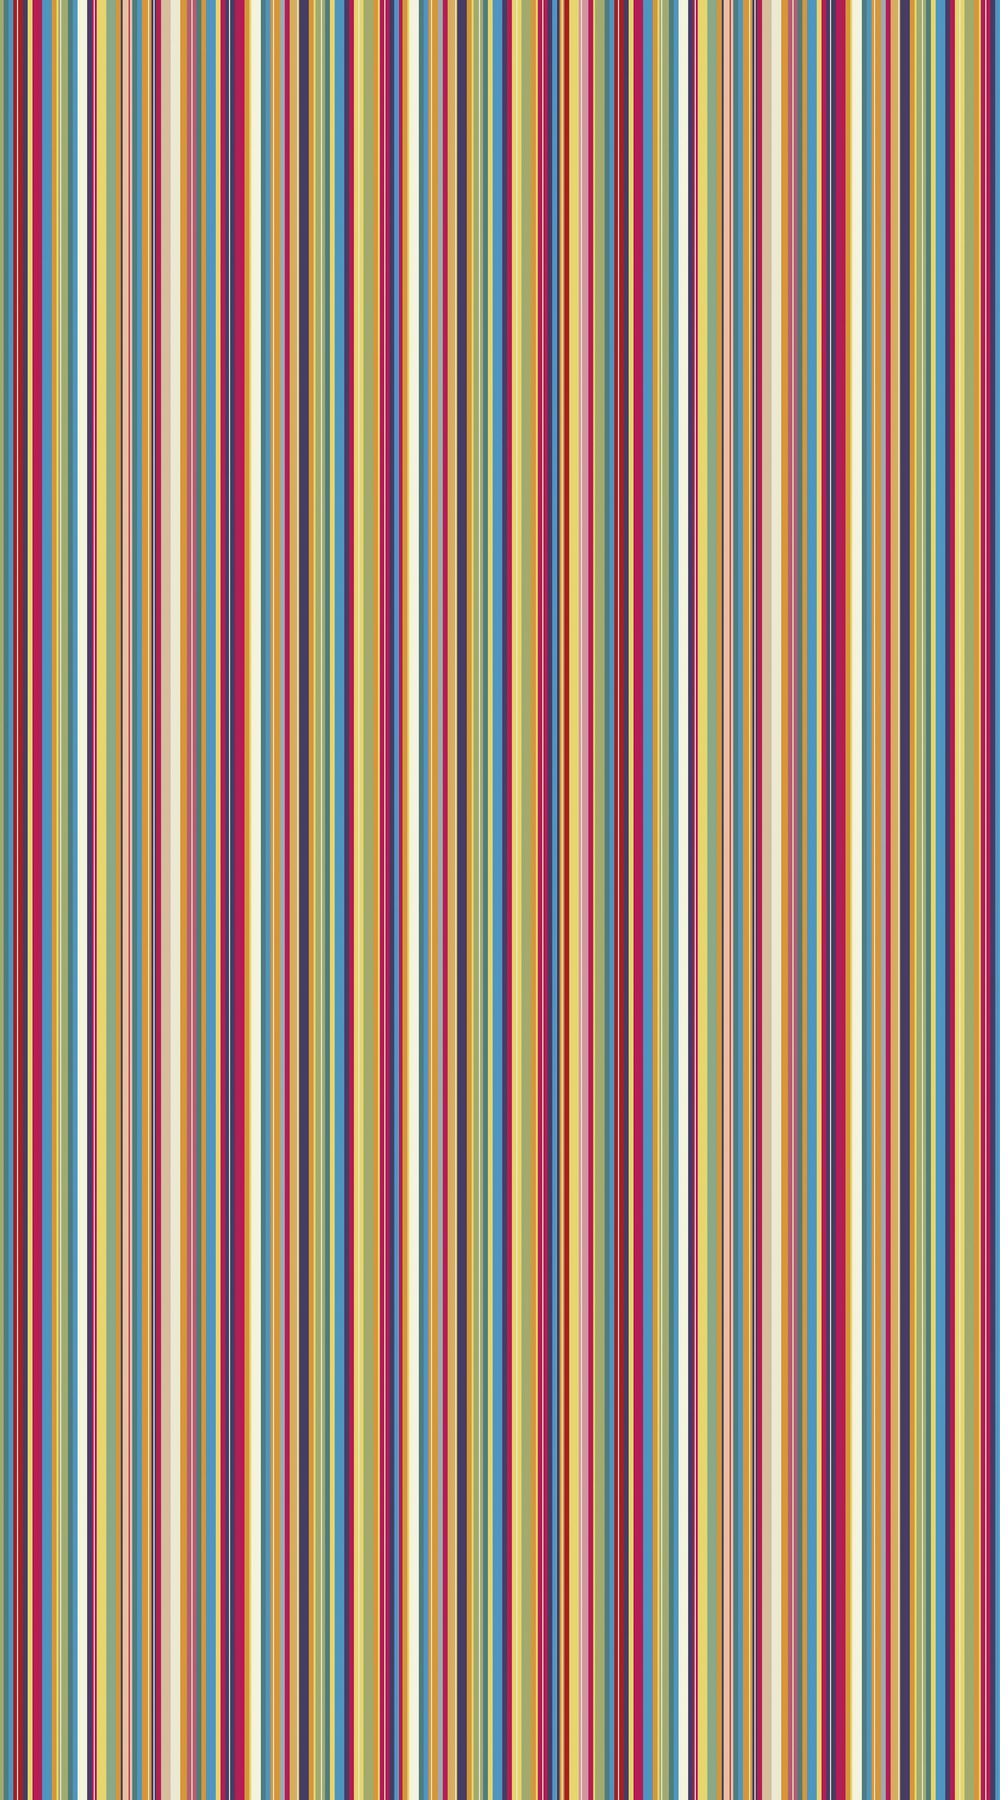 hatfieldphoto.com. Stripes wallpaper, Paul smith, Websters pages